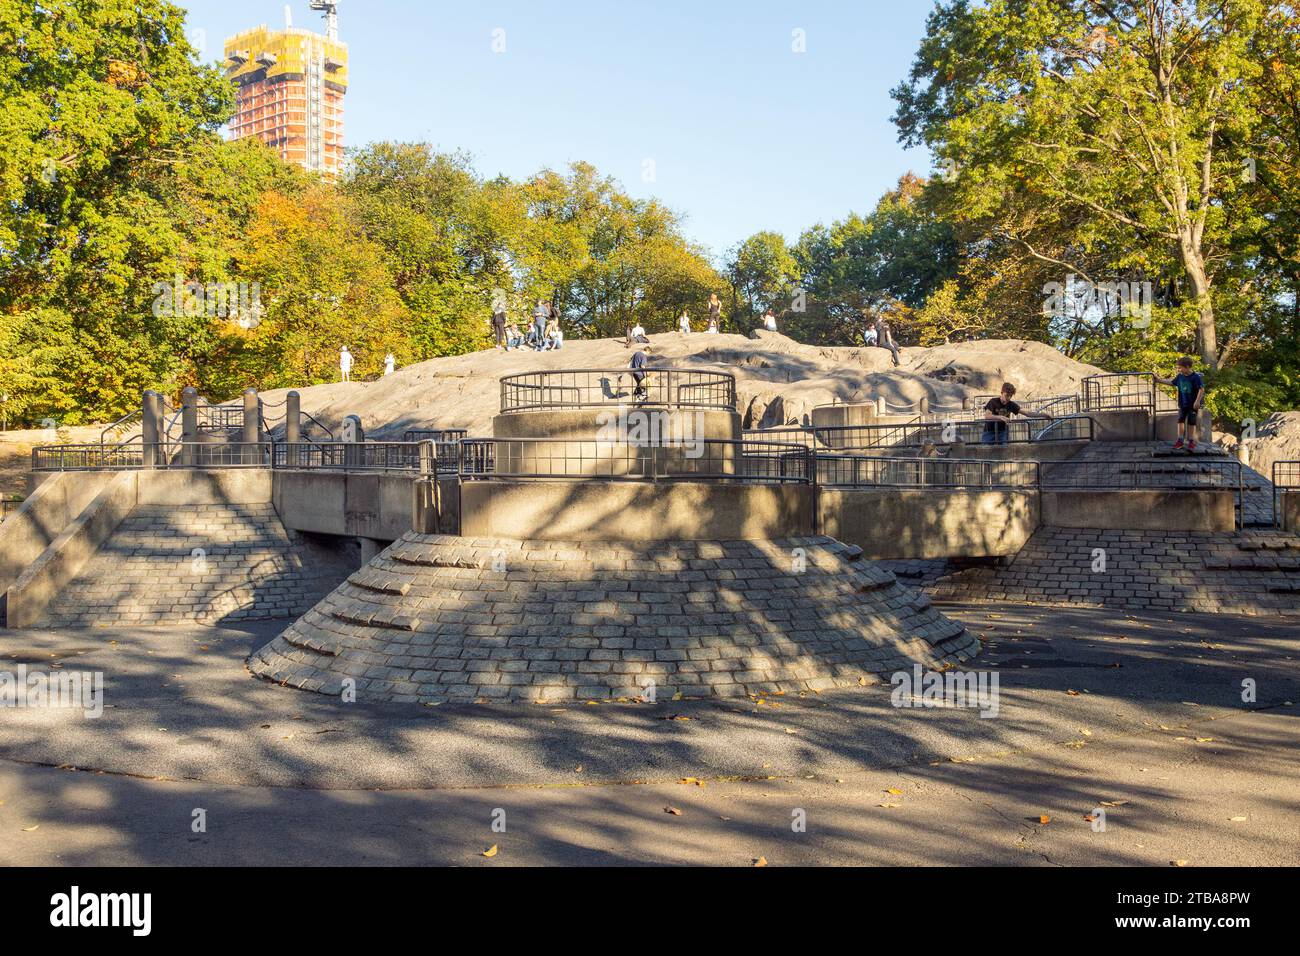 Umpire Rock and the Hecksher Playground, Central park in Fall, New York City, United States of America. Stock Photo